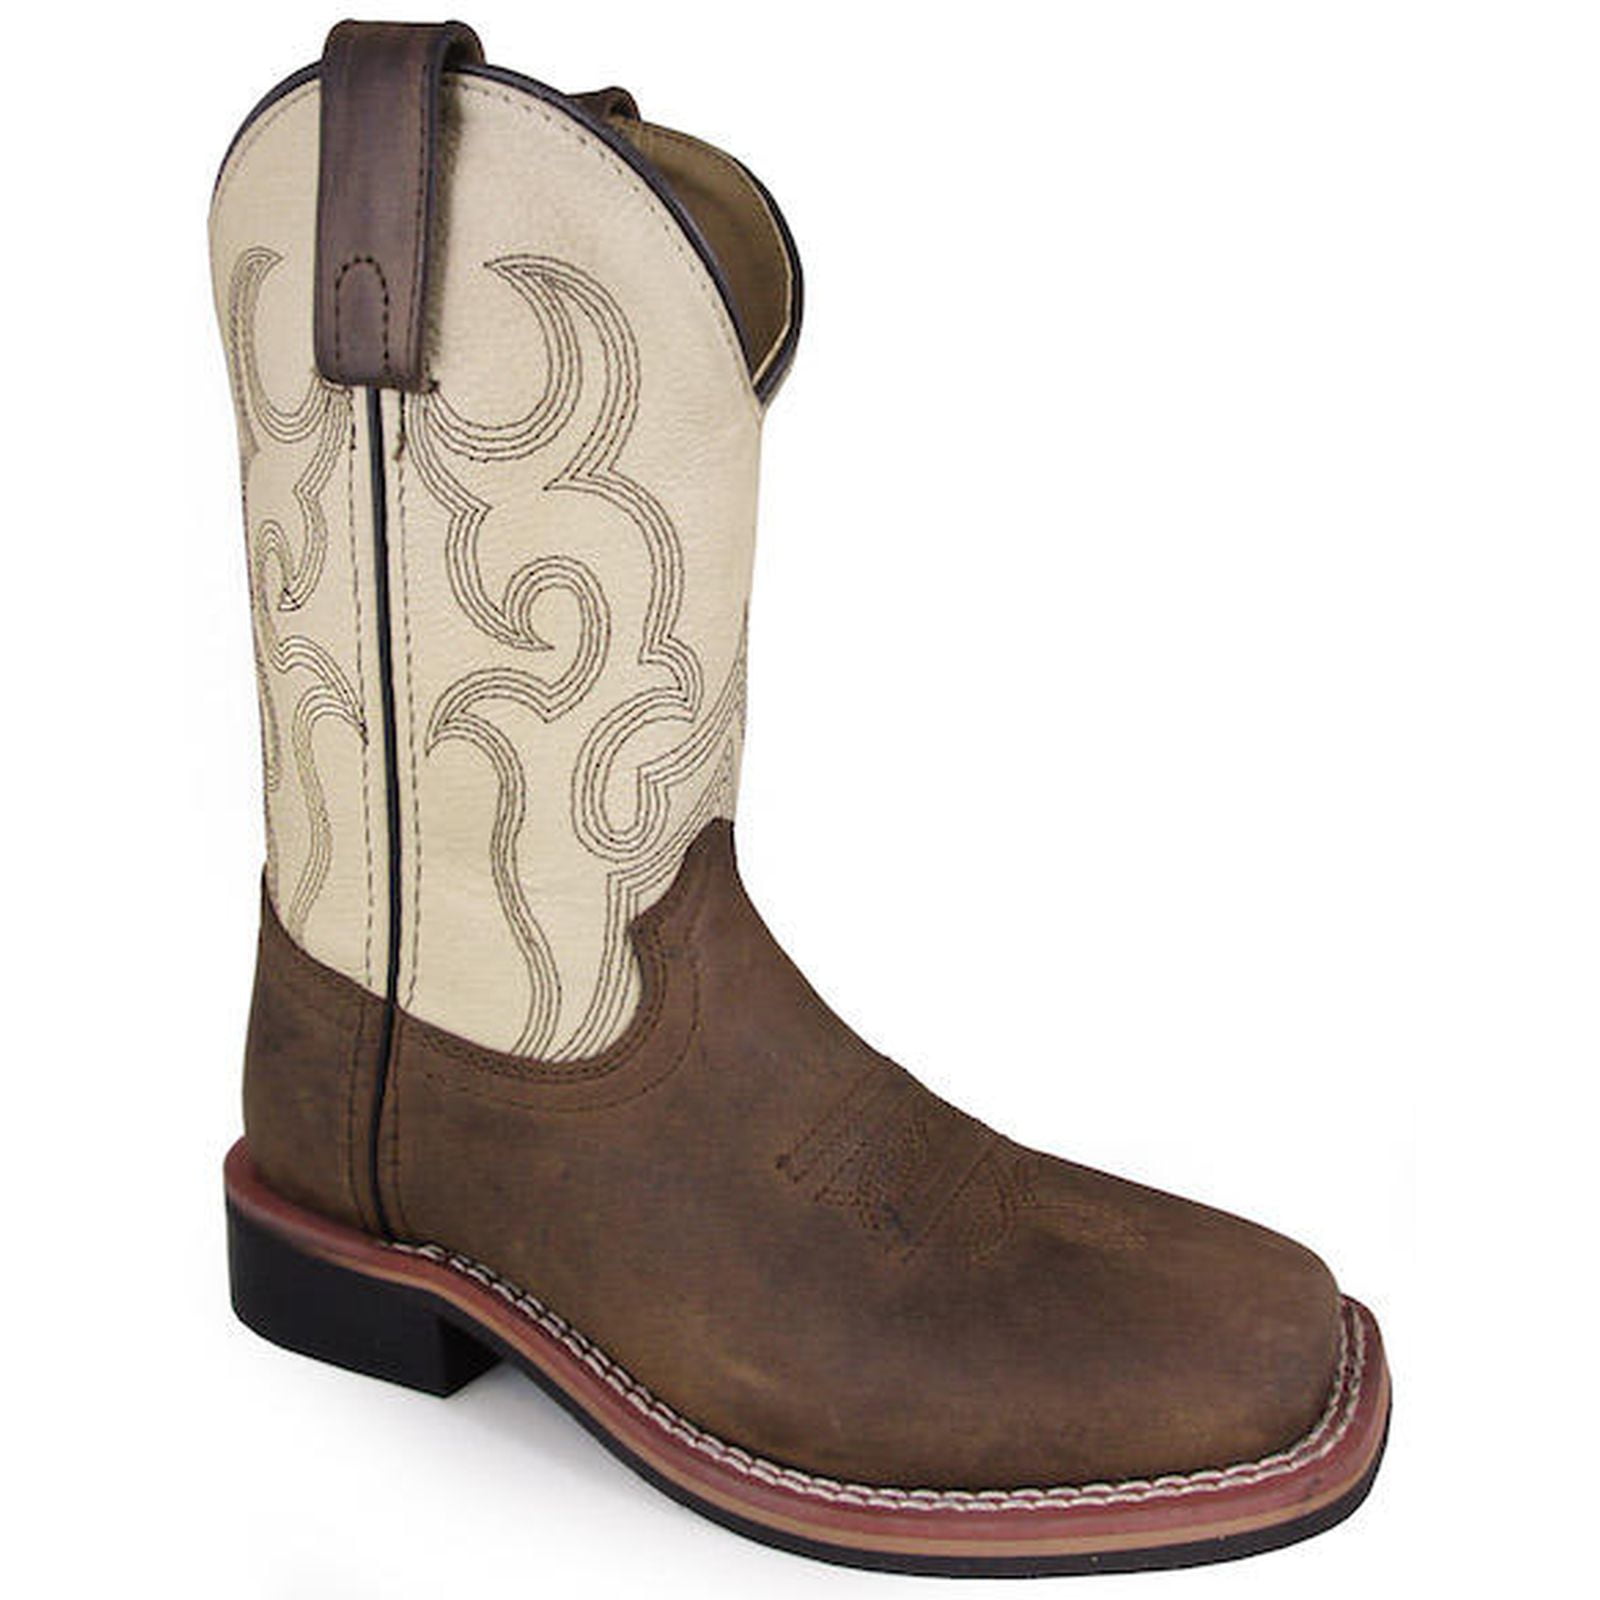 Smoky Children's Kid's Floralie Leather Western Cowboy Boot,3 Brown/Turquoise 